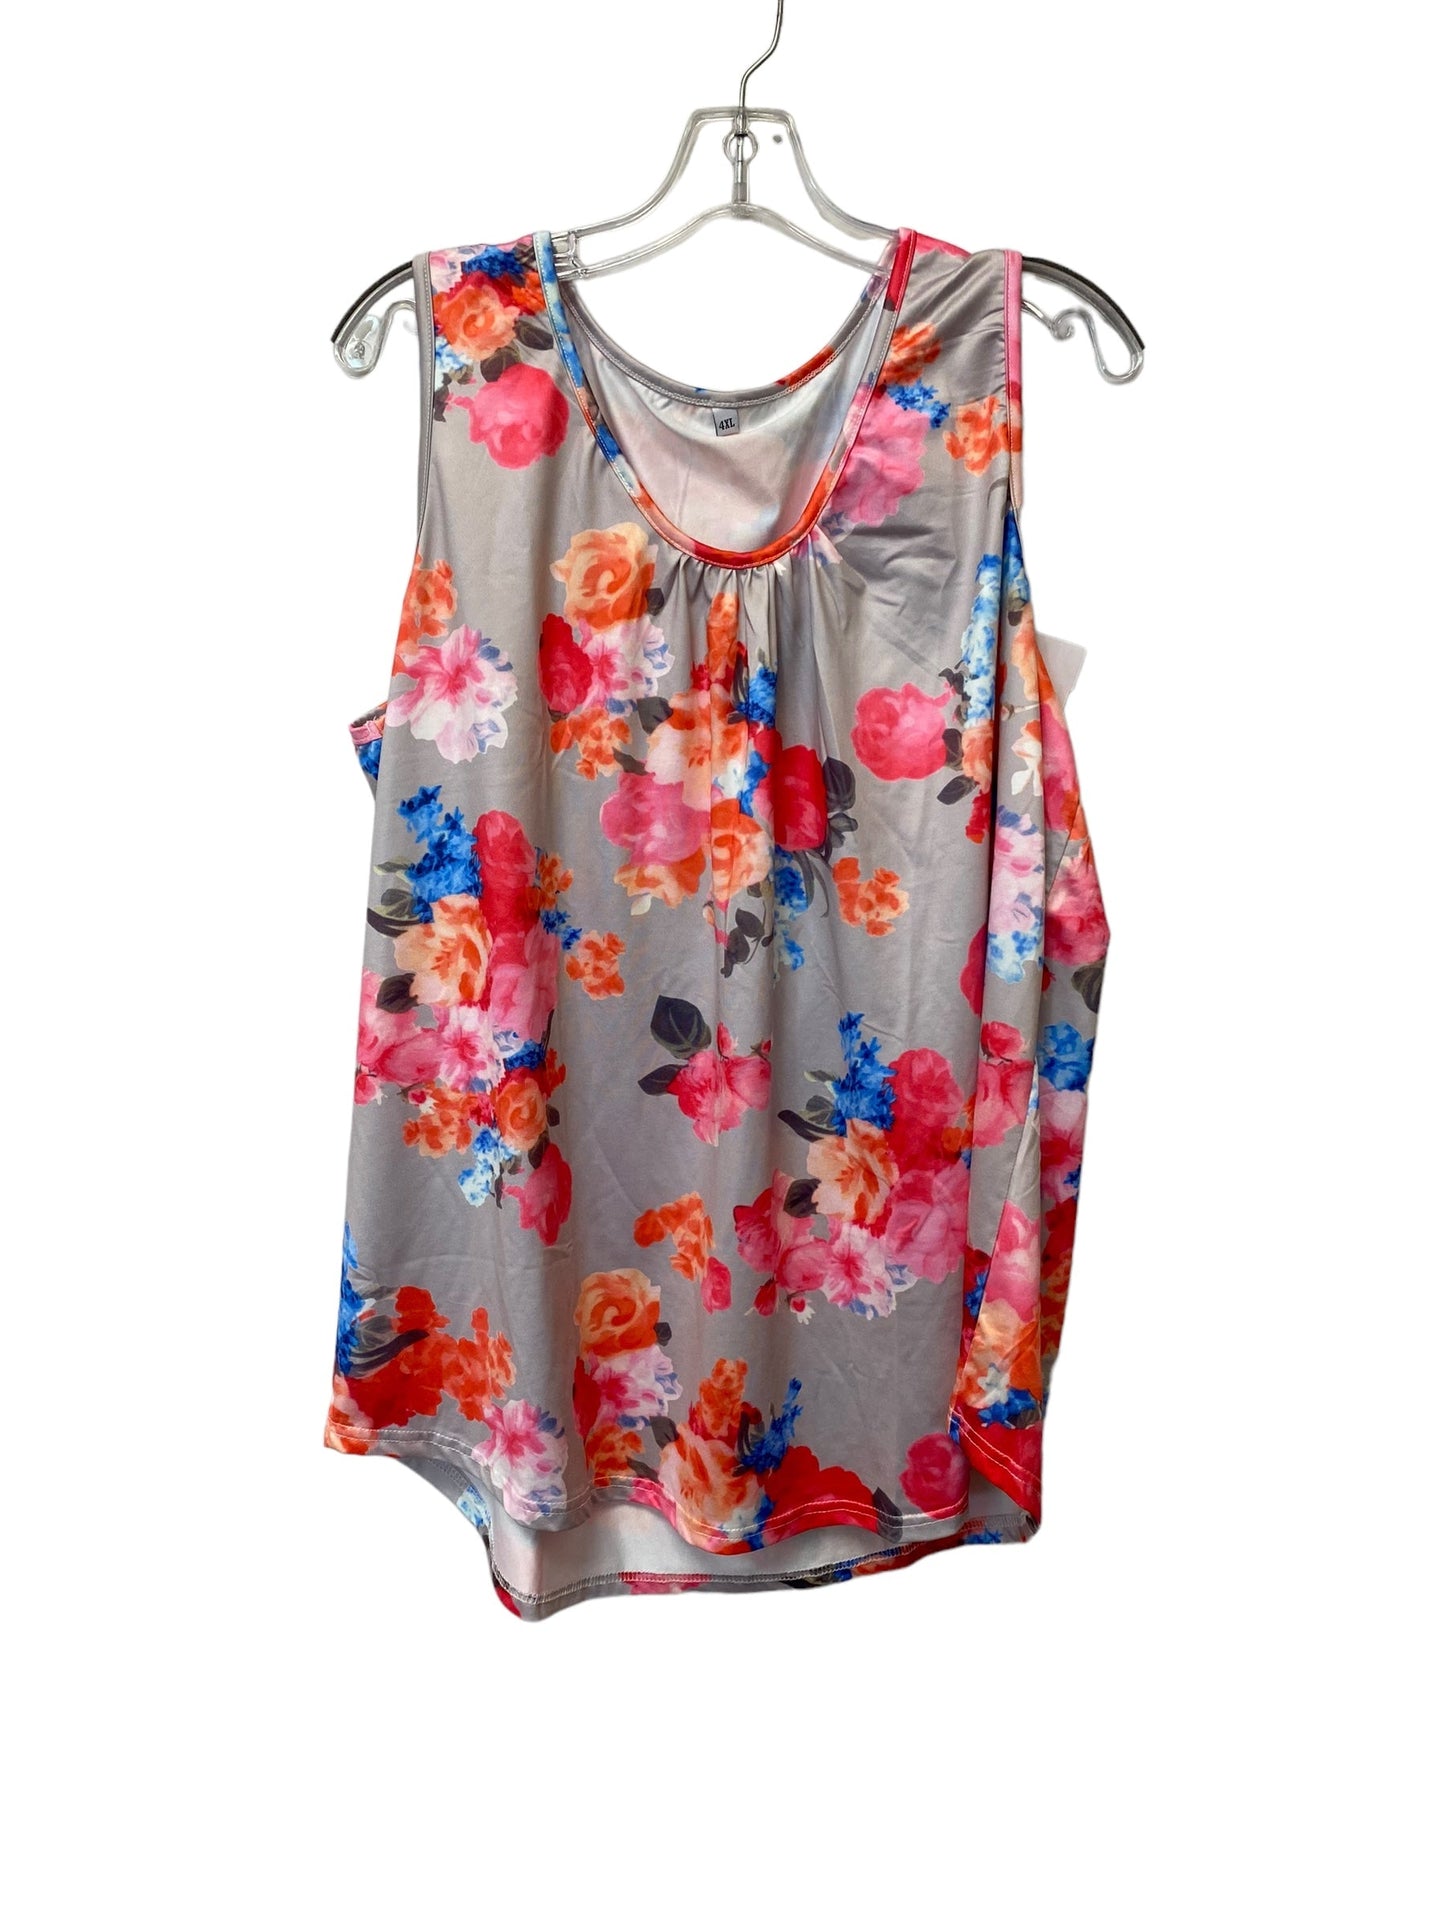 Top Sleeveless By Clothes Mentor  Size: 4x